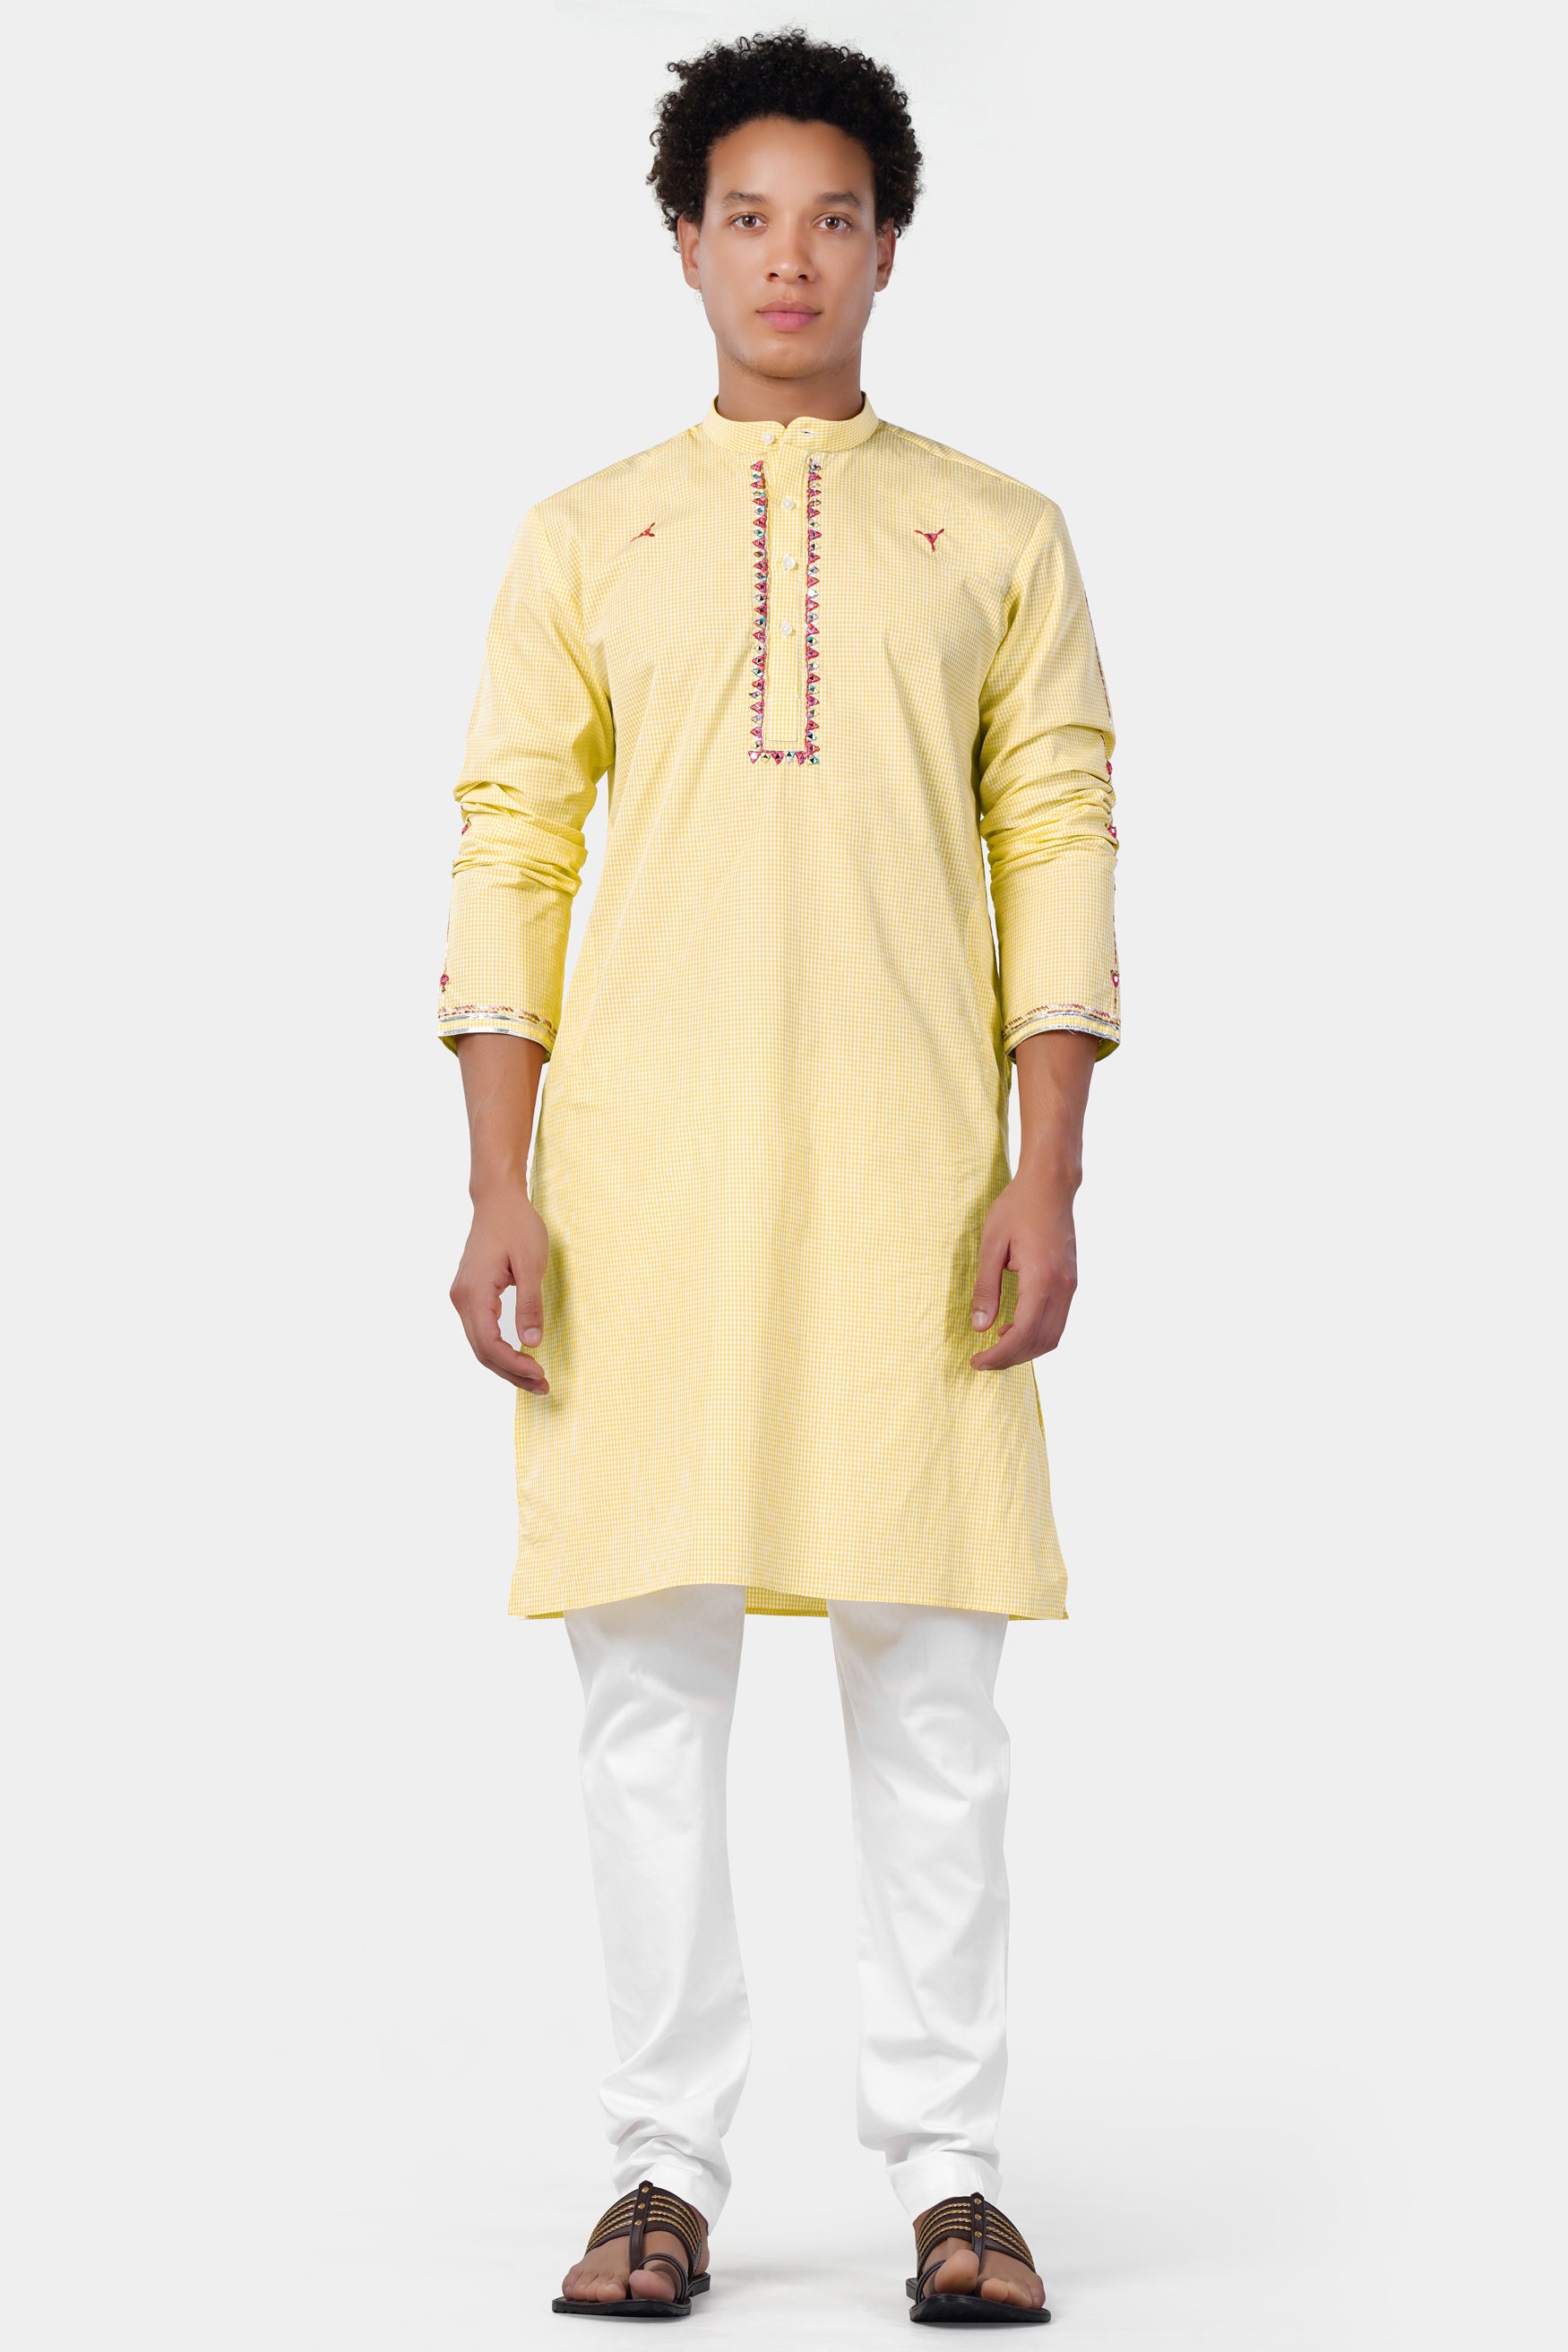 Brulee Yellow and White Gingham Checkered with Thread Embroidered and Mirror Work Premium Cotton Designer Kurta Set